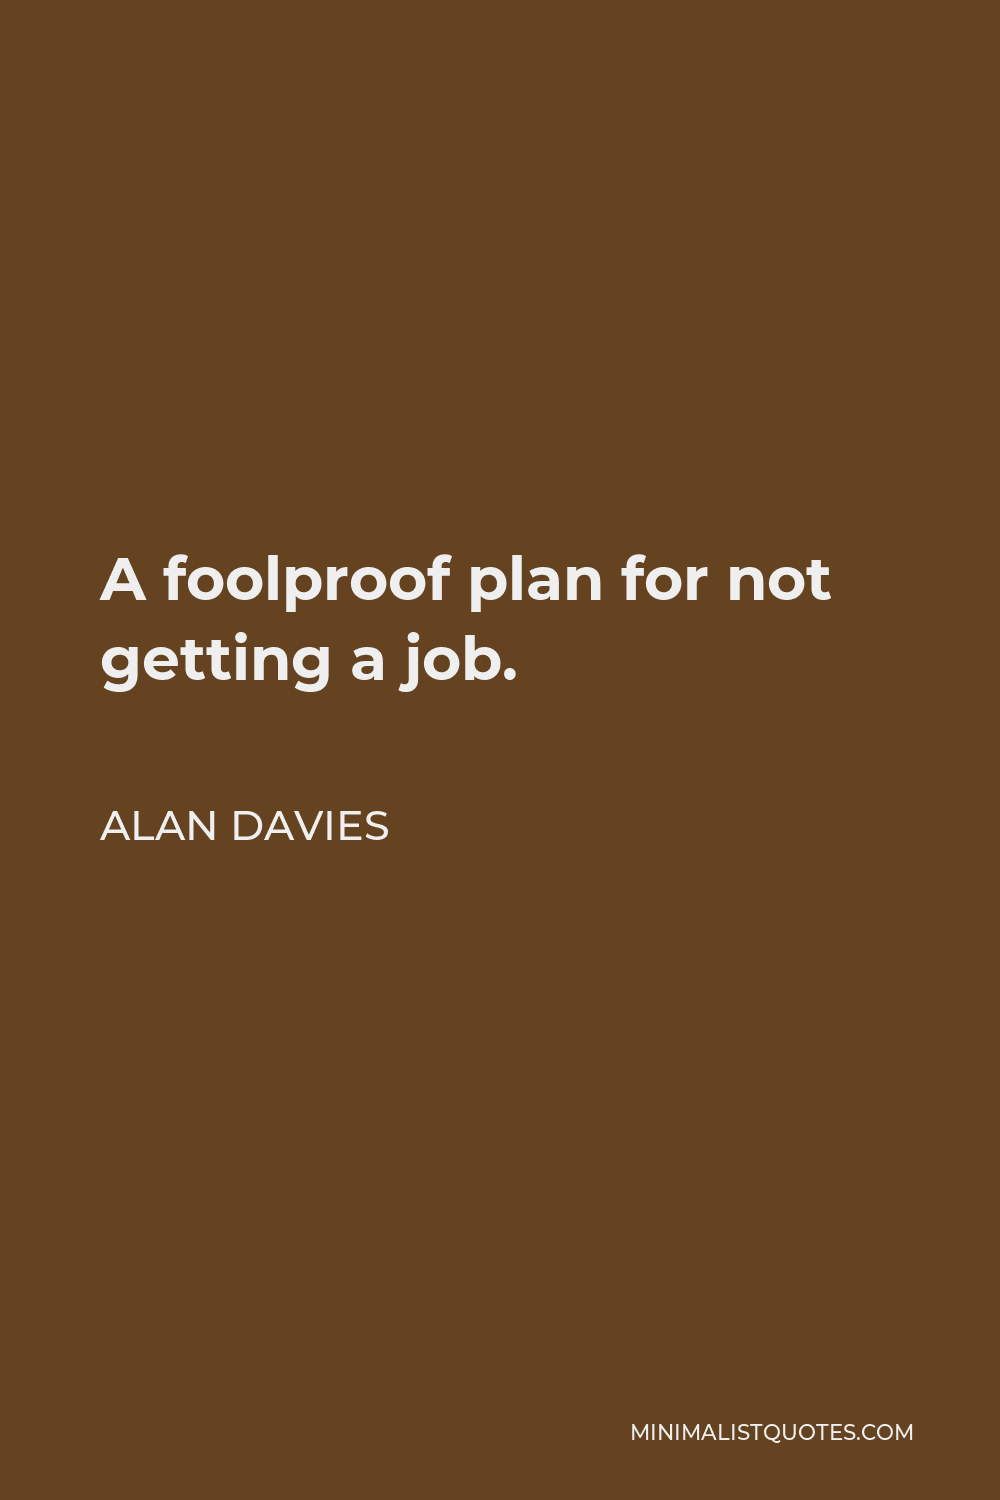 Alan Davies Quote - A foolproof plan for not getting a job.